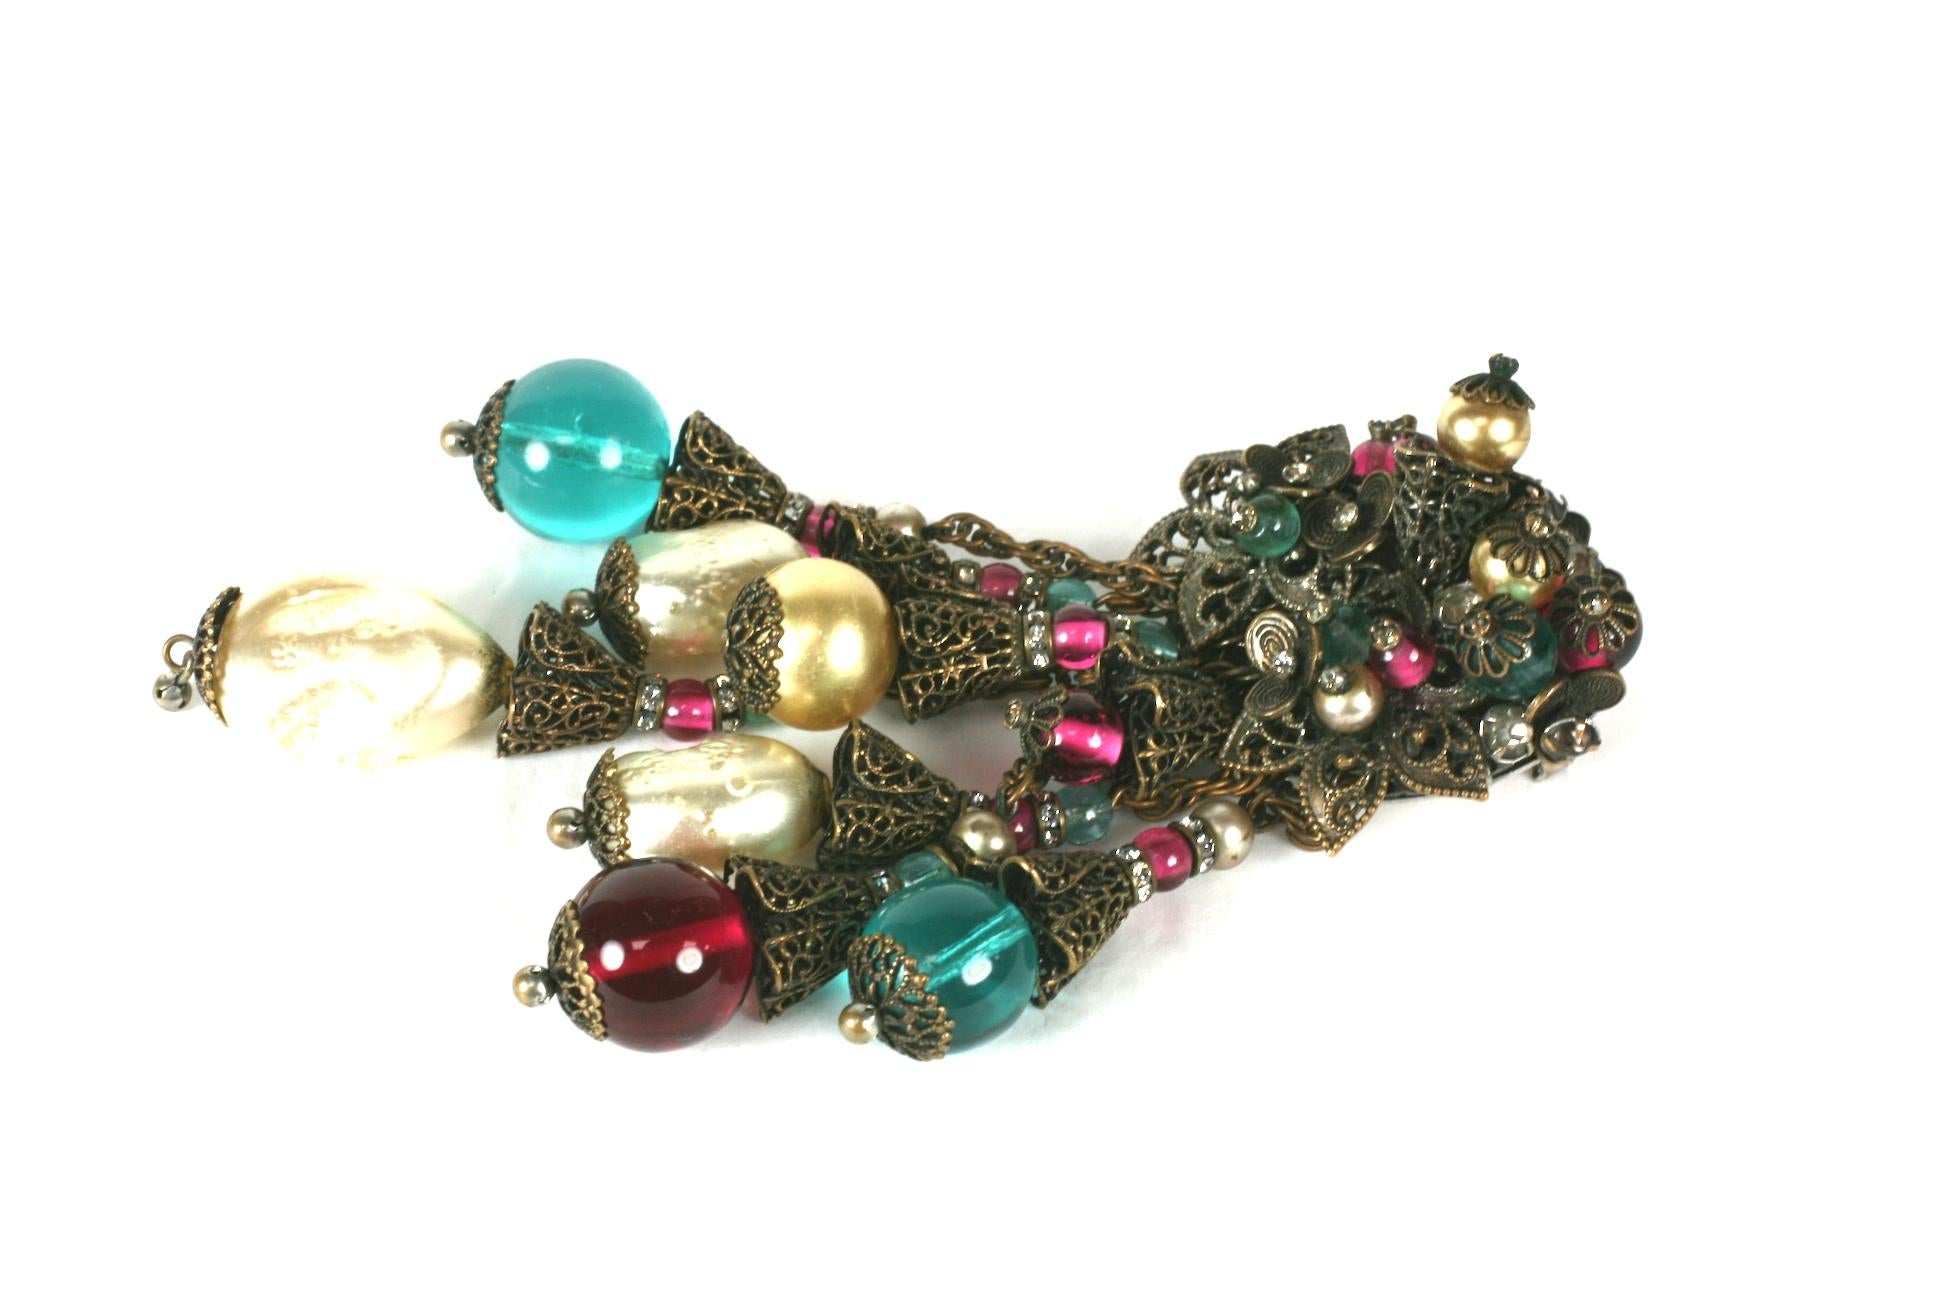 Early and large Miriam Haskell Pendant Brooch with faux pearls and ruby and blue pate de verre glass beads. 
Central motif has elaborately wired bead and floral filigree work in a patinaed bronze finish accented by pave crystals throughout.
Unsigned